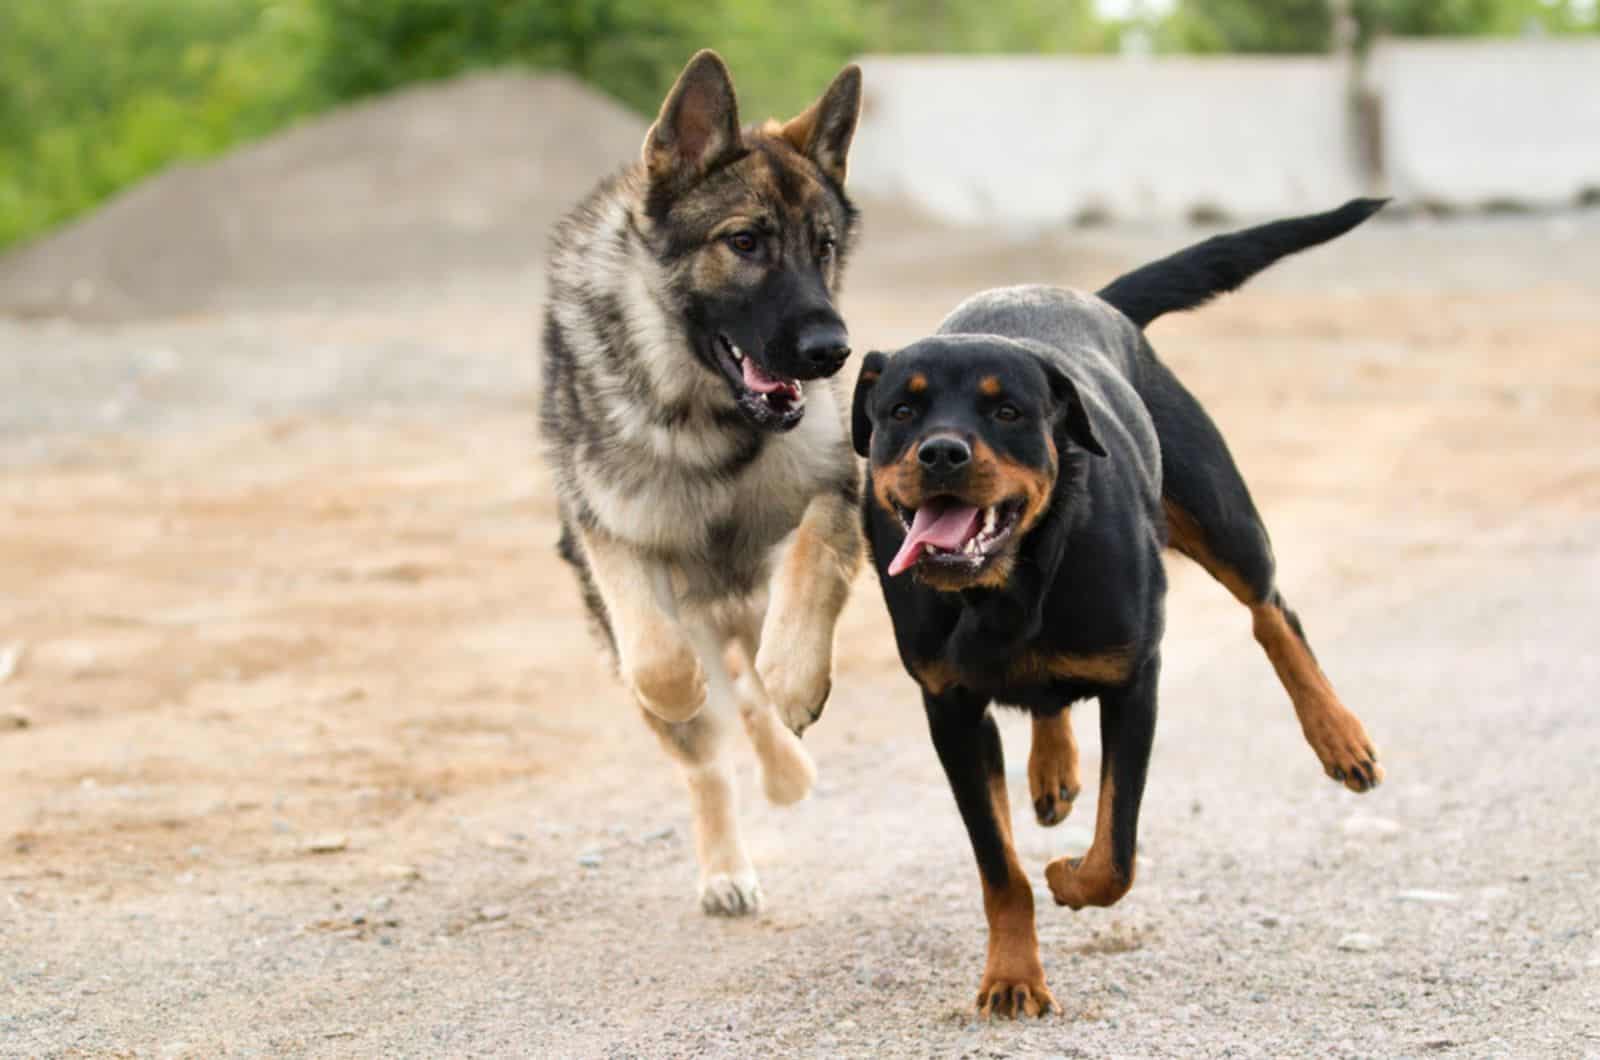 german shepherd and rottweiler running and playing on the road